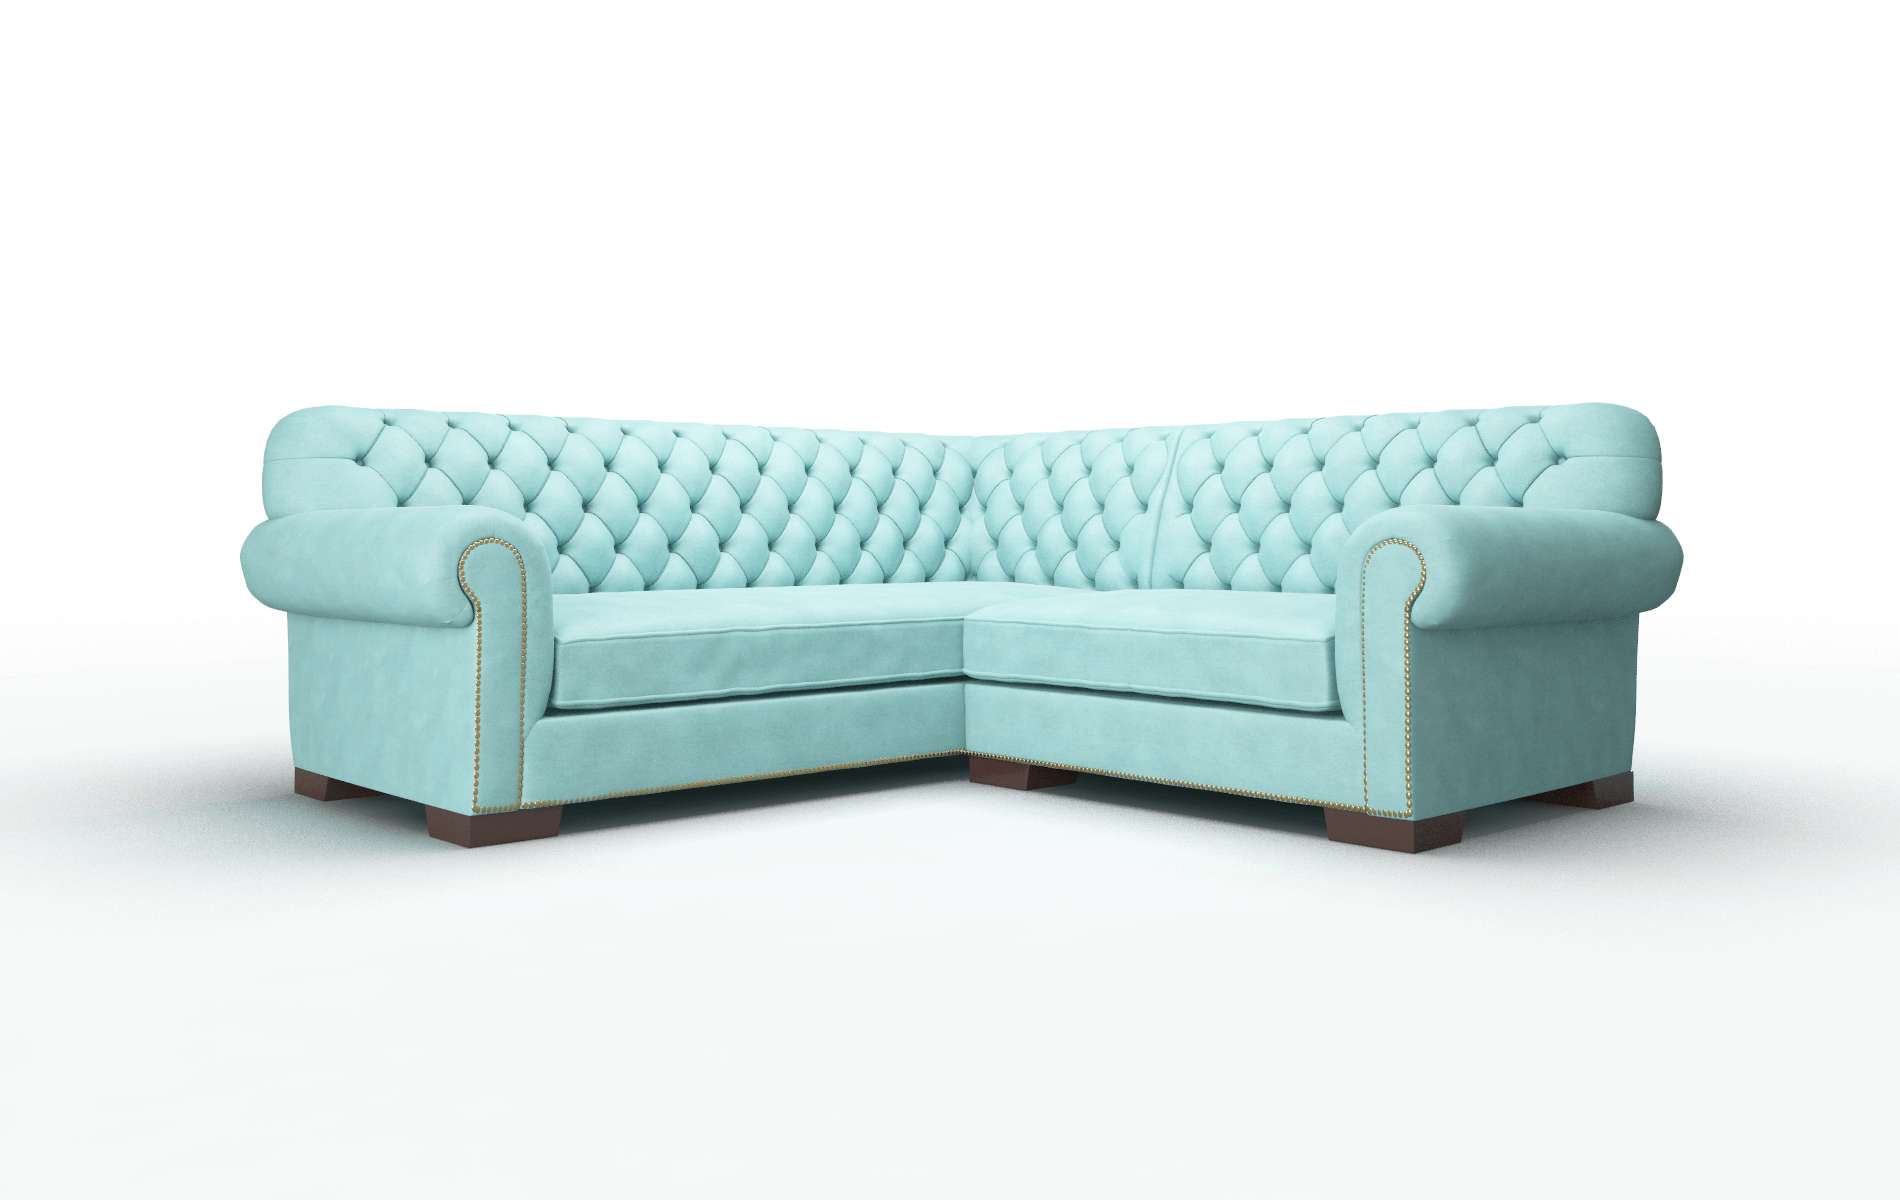 Chester Curious Turquoise Sectional espresso legs